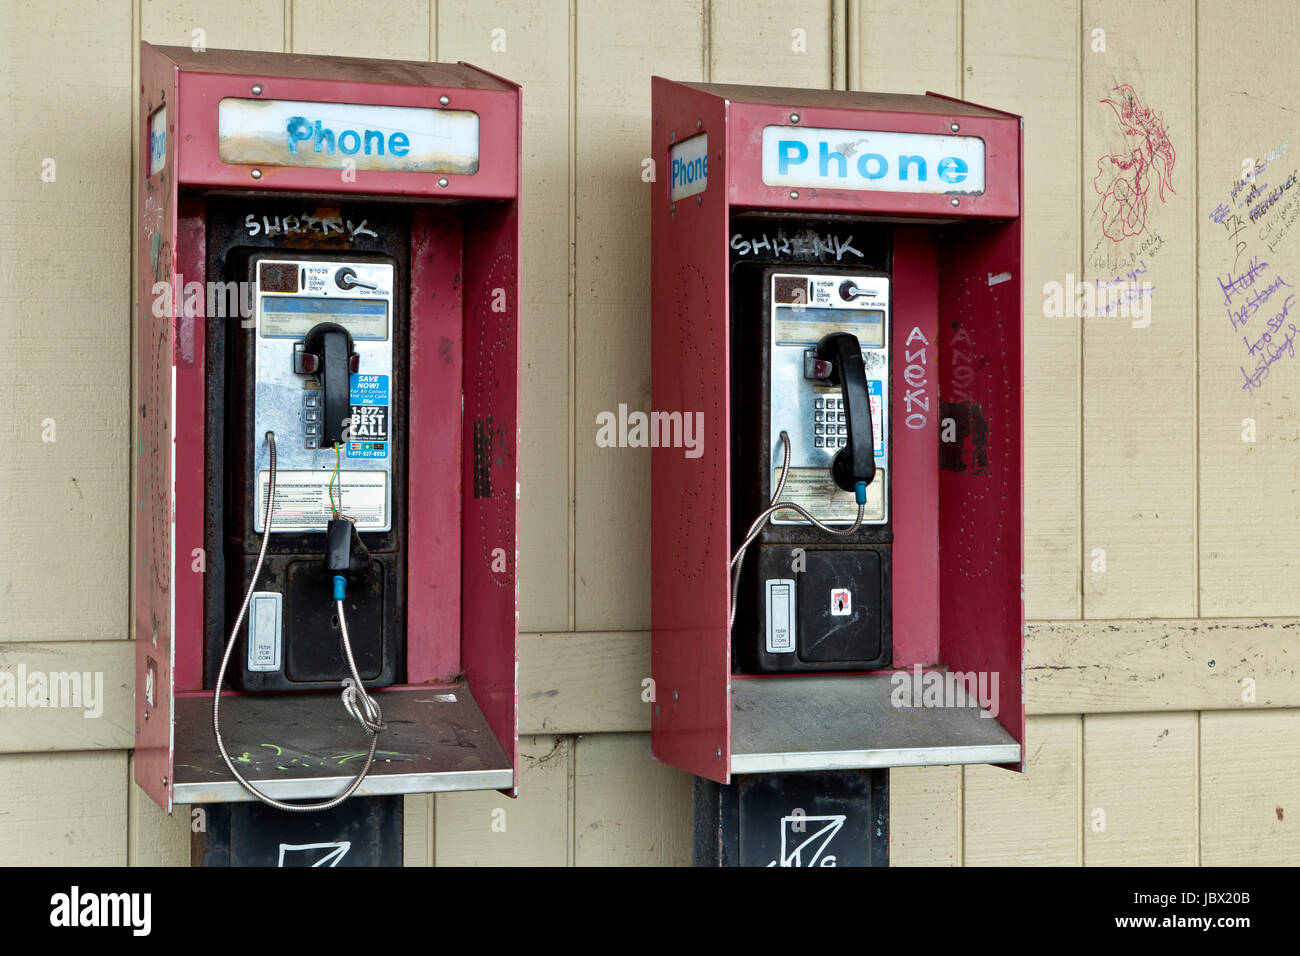 Abandoned coin operated public pay telephones with coin release slot,  graffiti on telephone & wall. Stock Photo